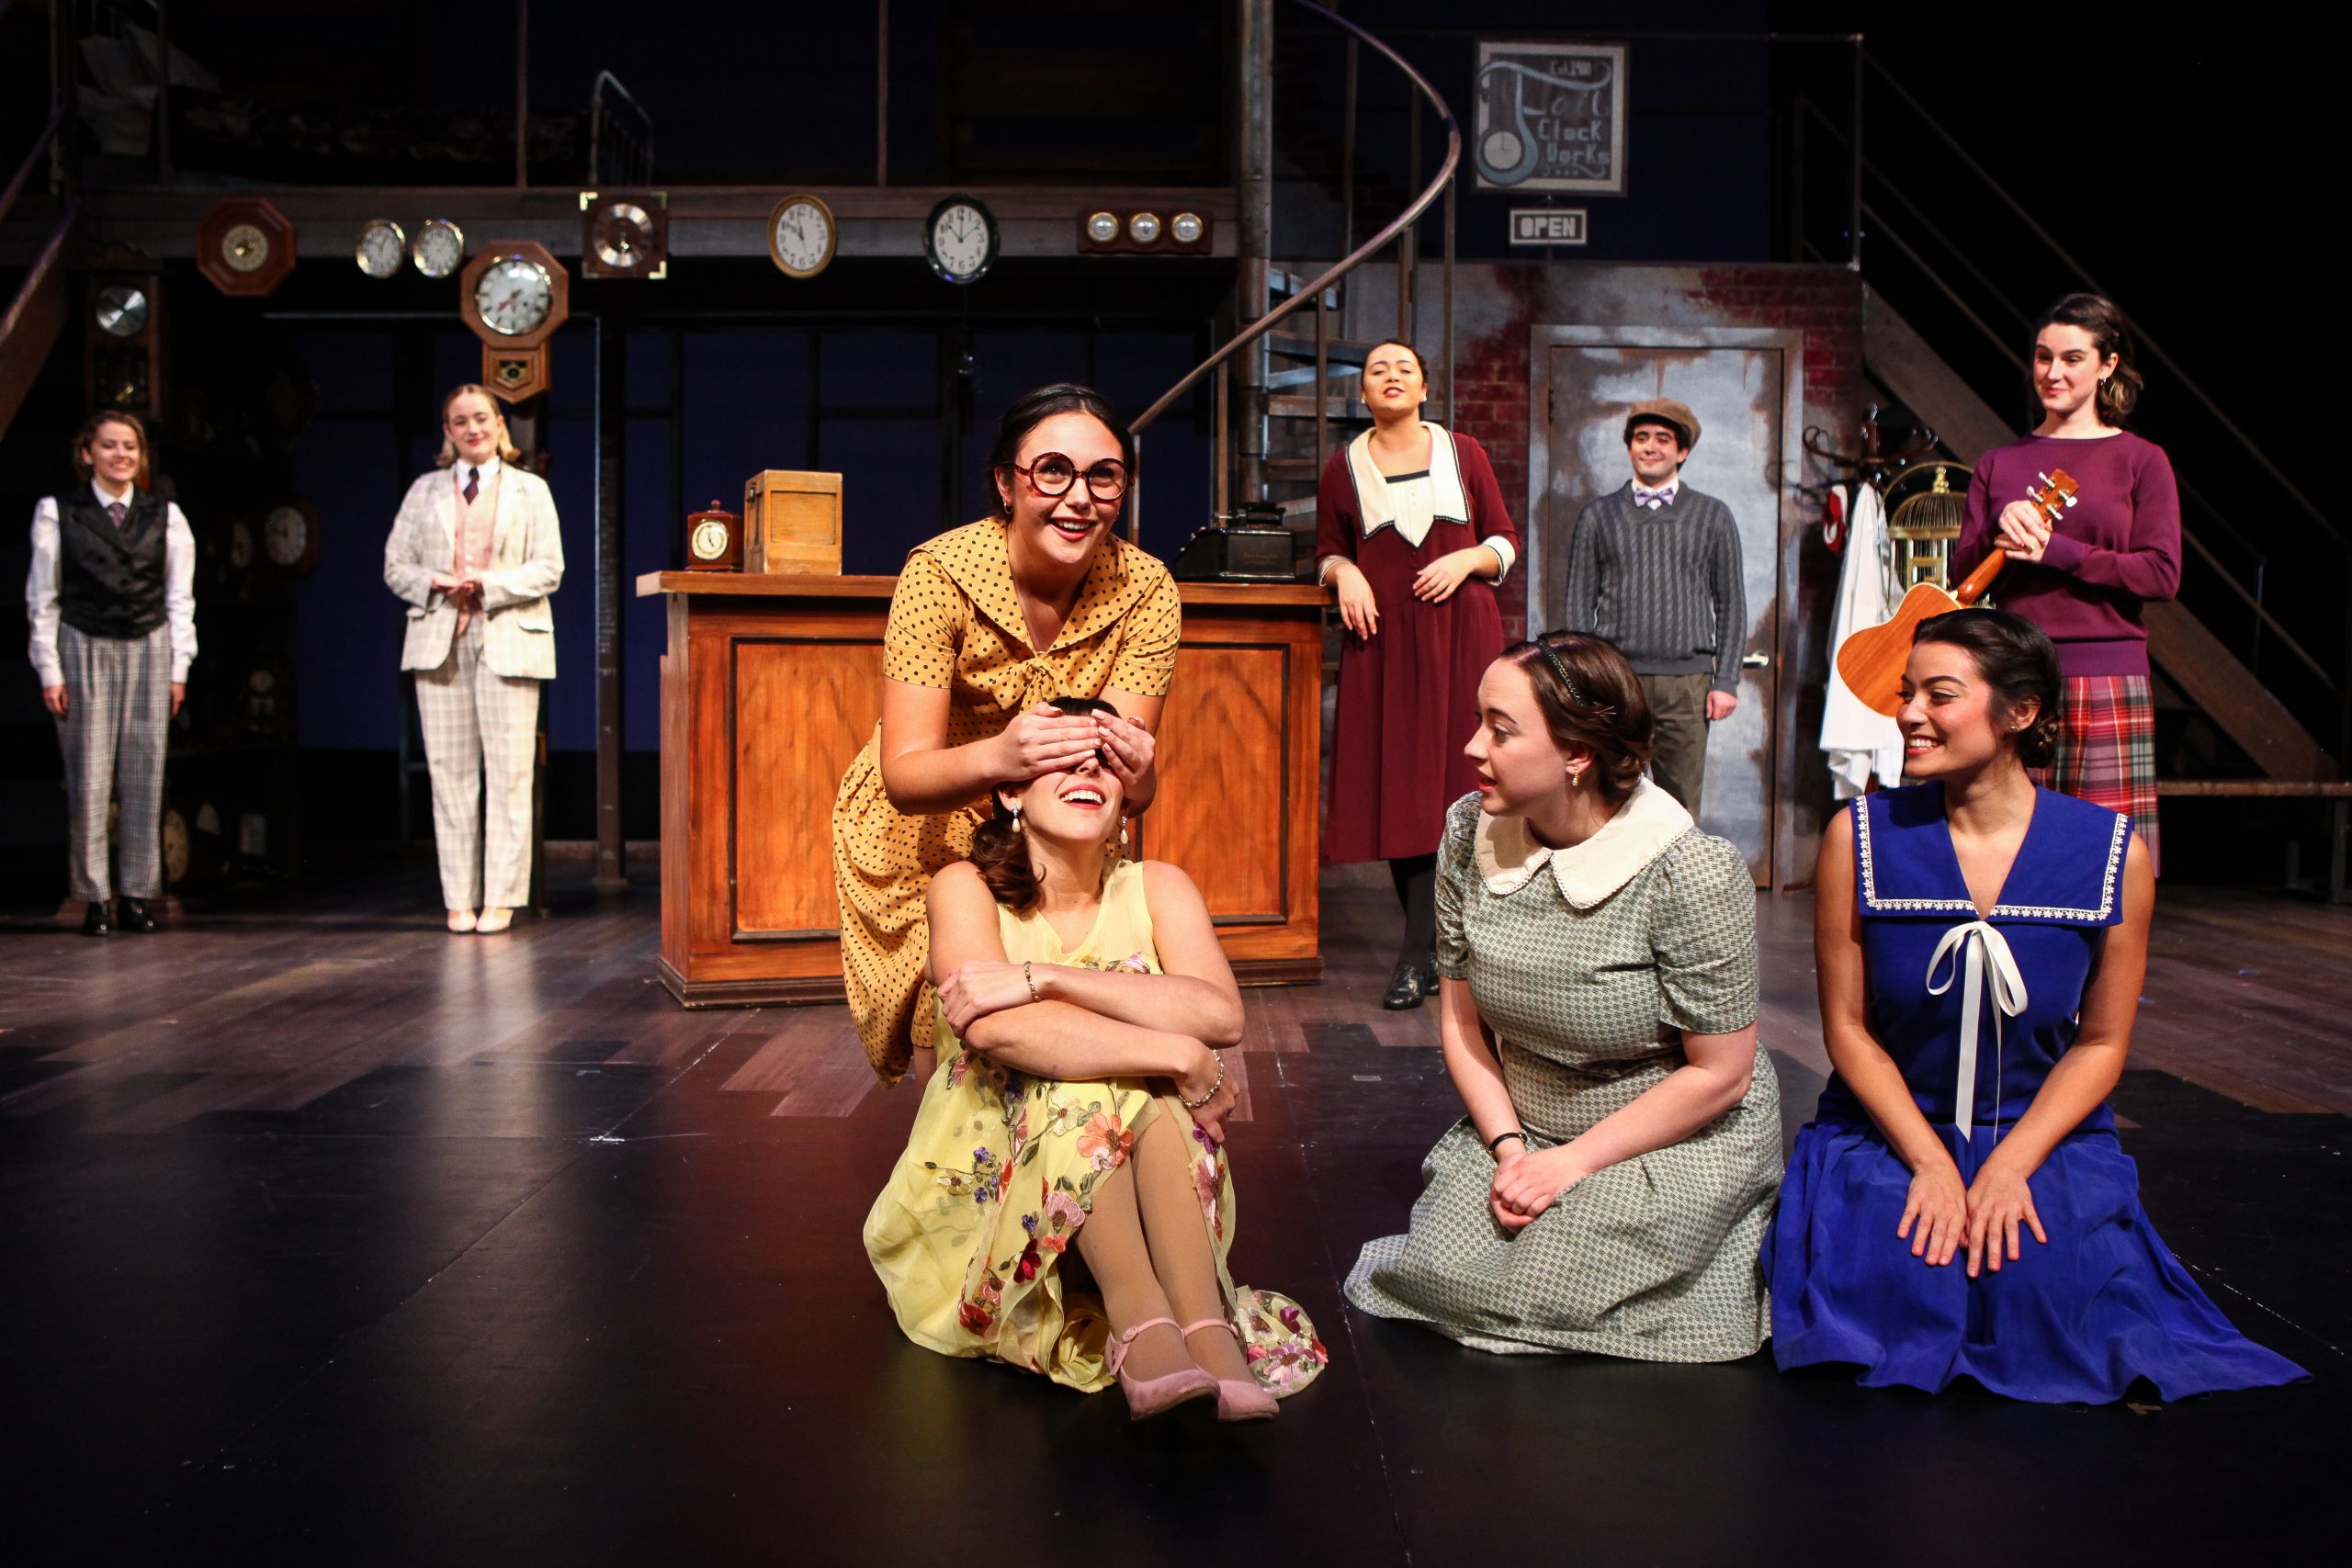 'Failure: A Love Story' will be playing at the Syracuse Stage from Nov. 12 through Nov. 19.